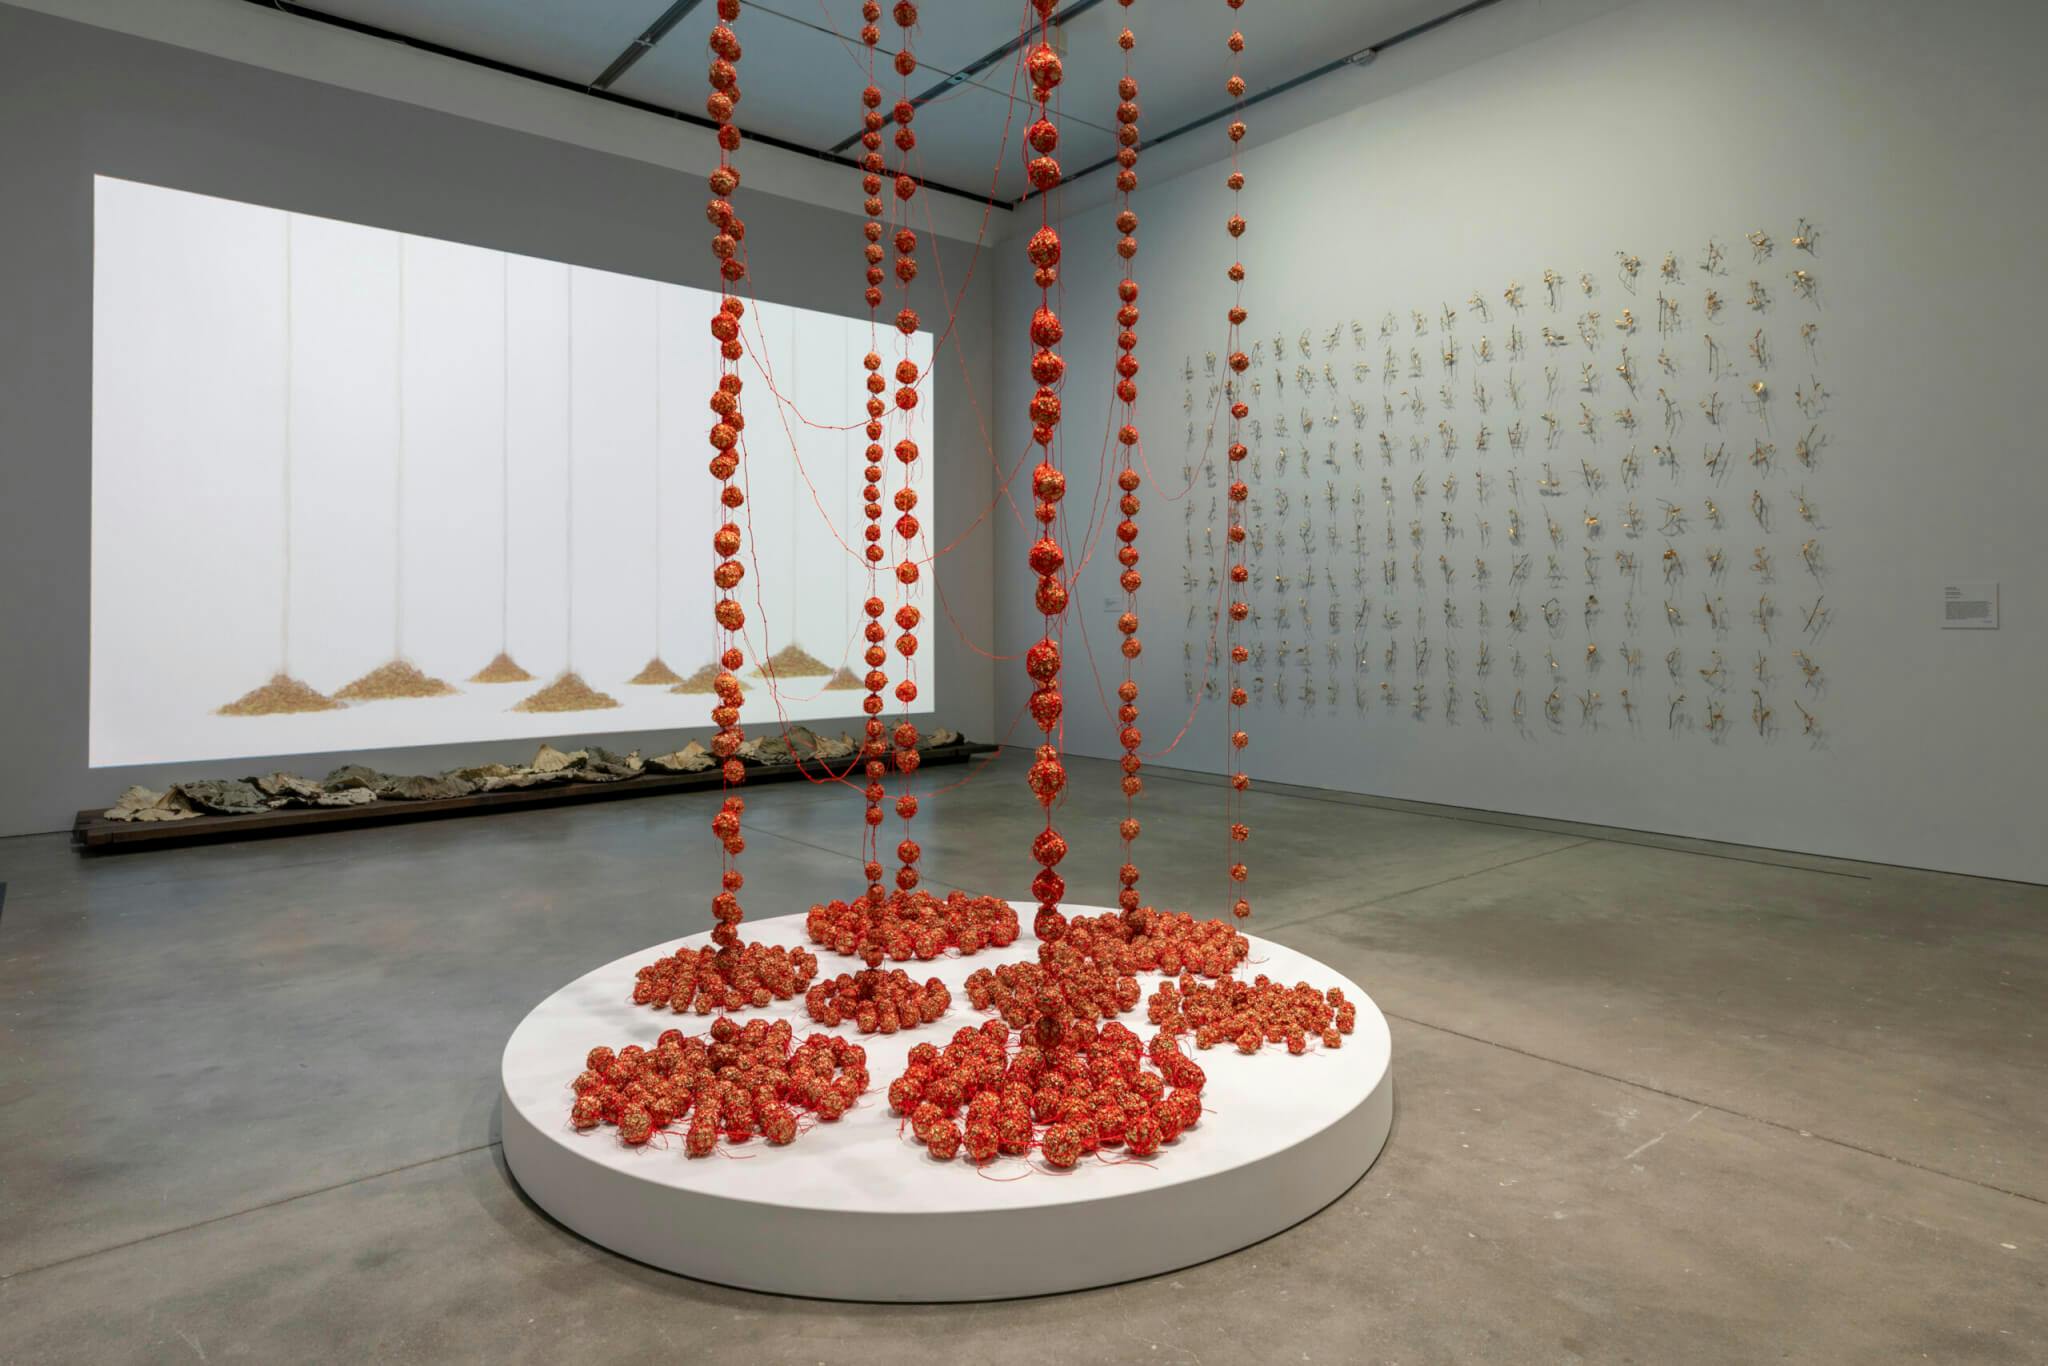 Dangling red strands form an installation by Yu-Wen Wu in the middle of a room.